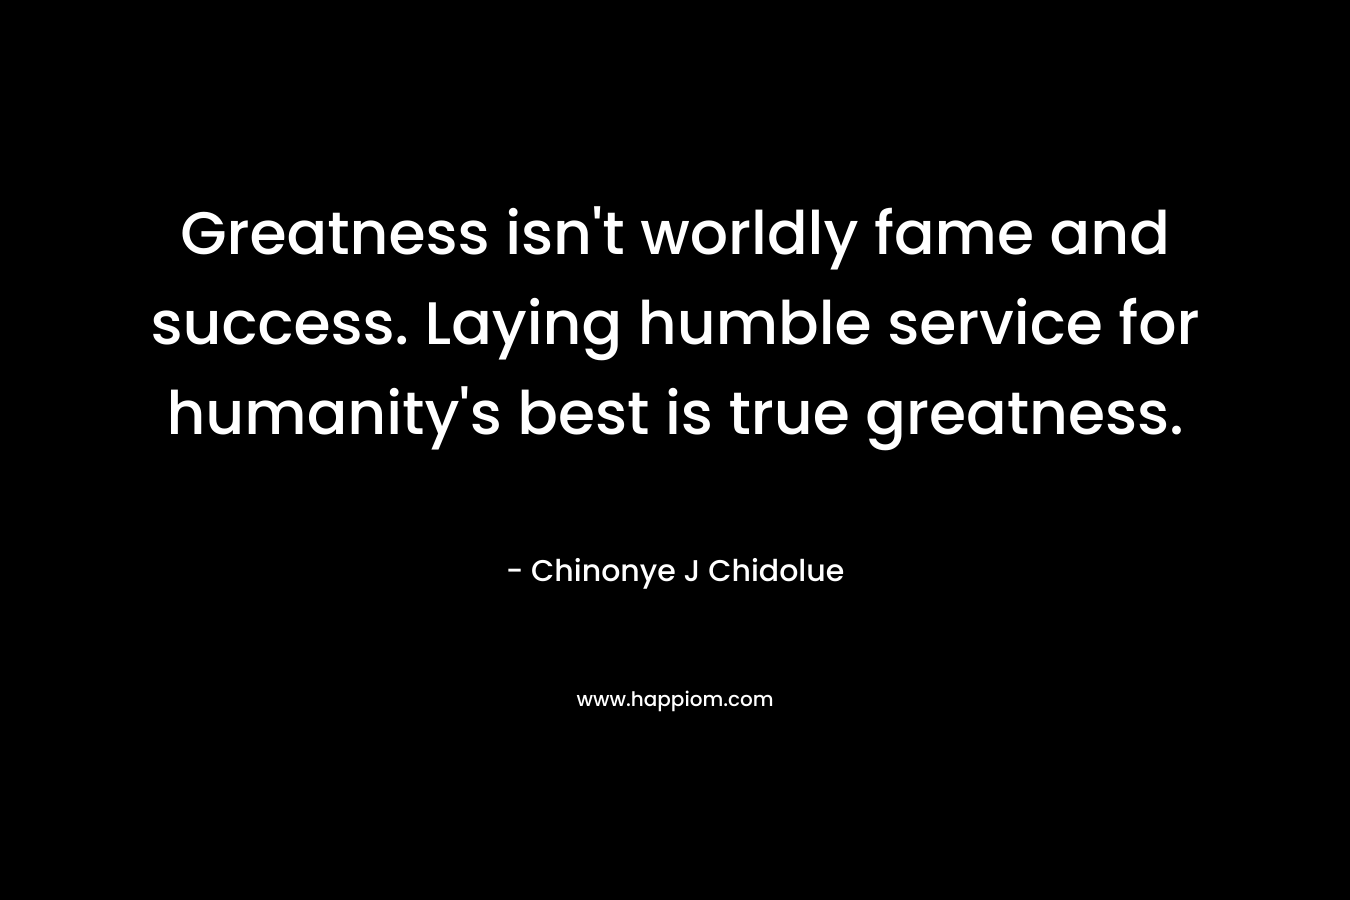 Greatness isn't worldly fame and success. Laying humble service for humanity's best is true greatness.